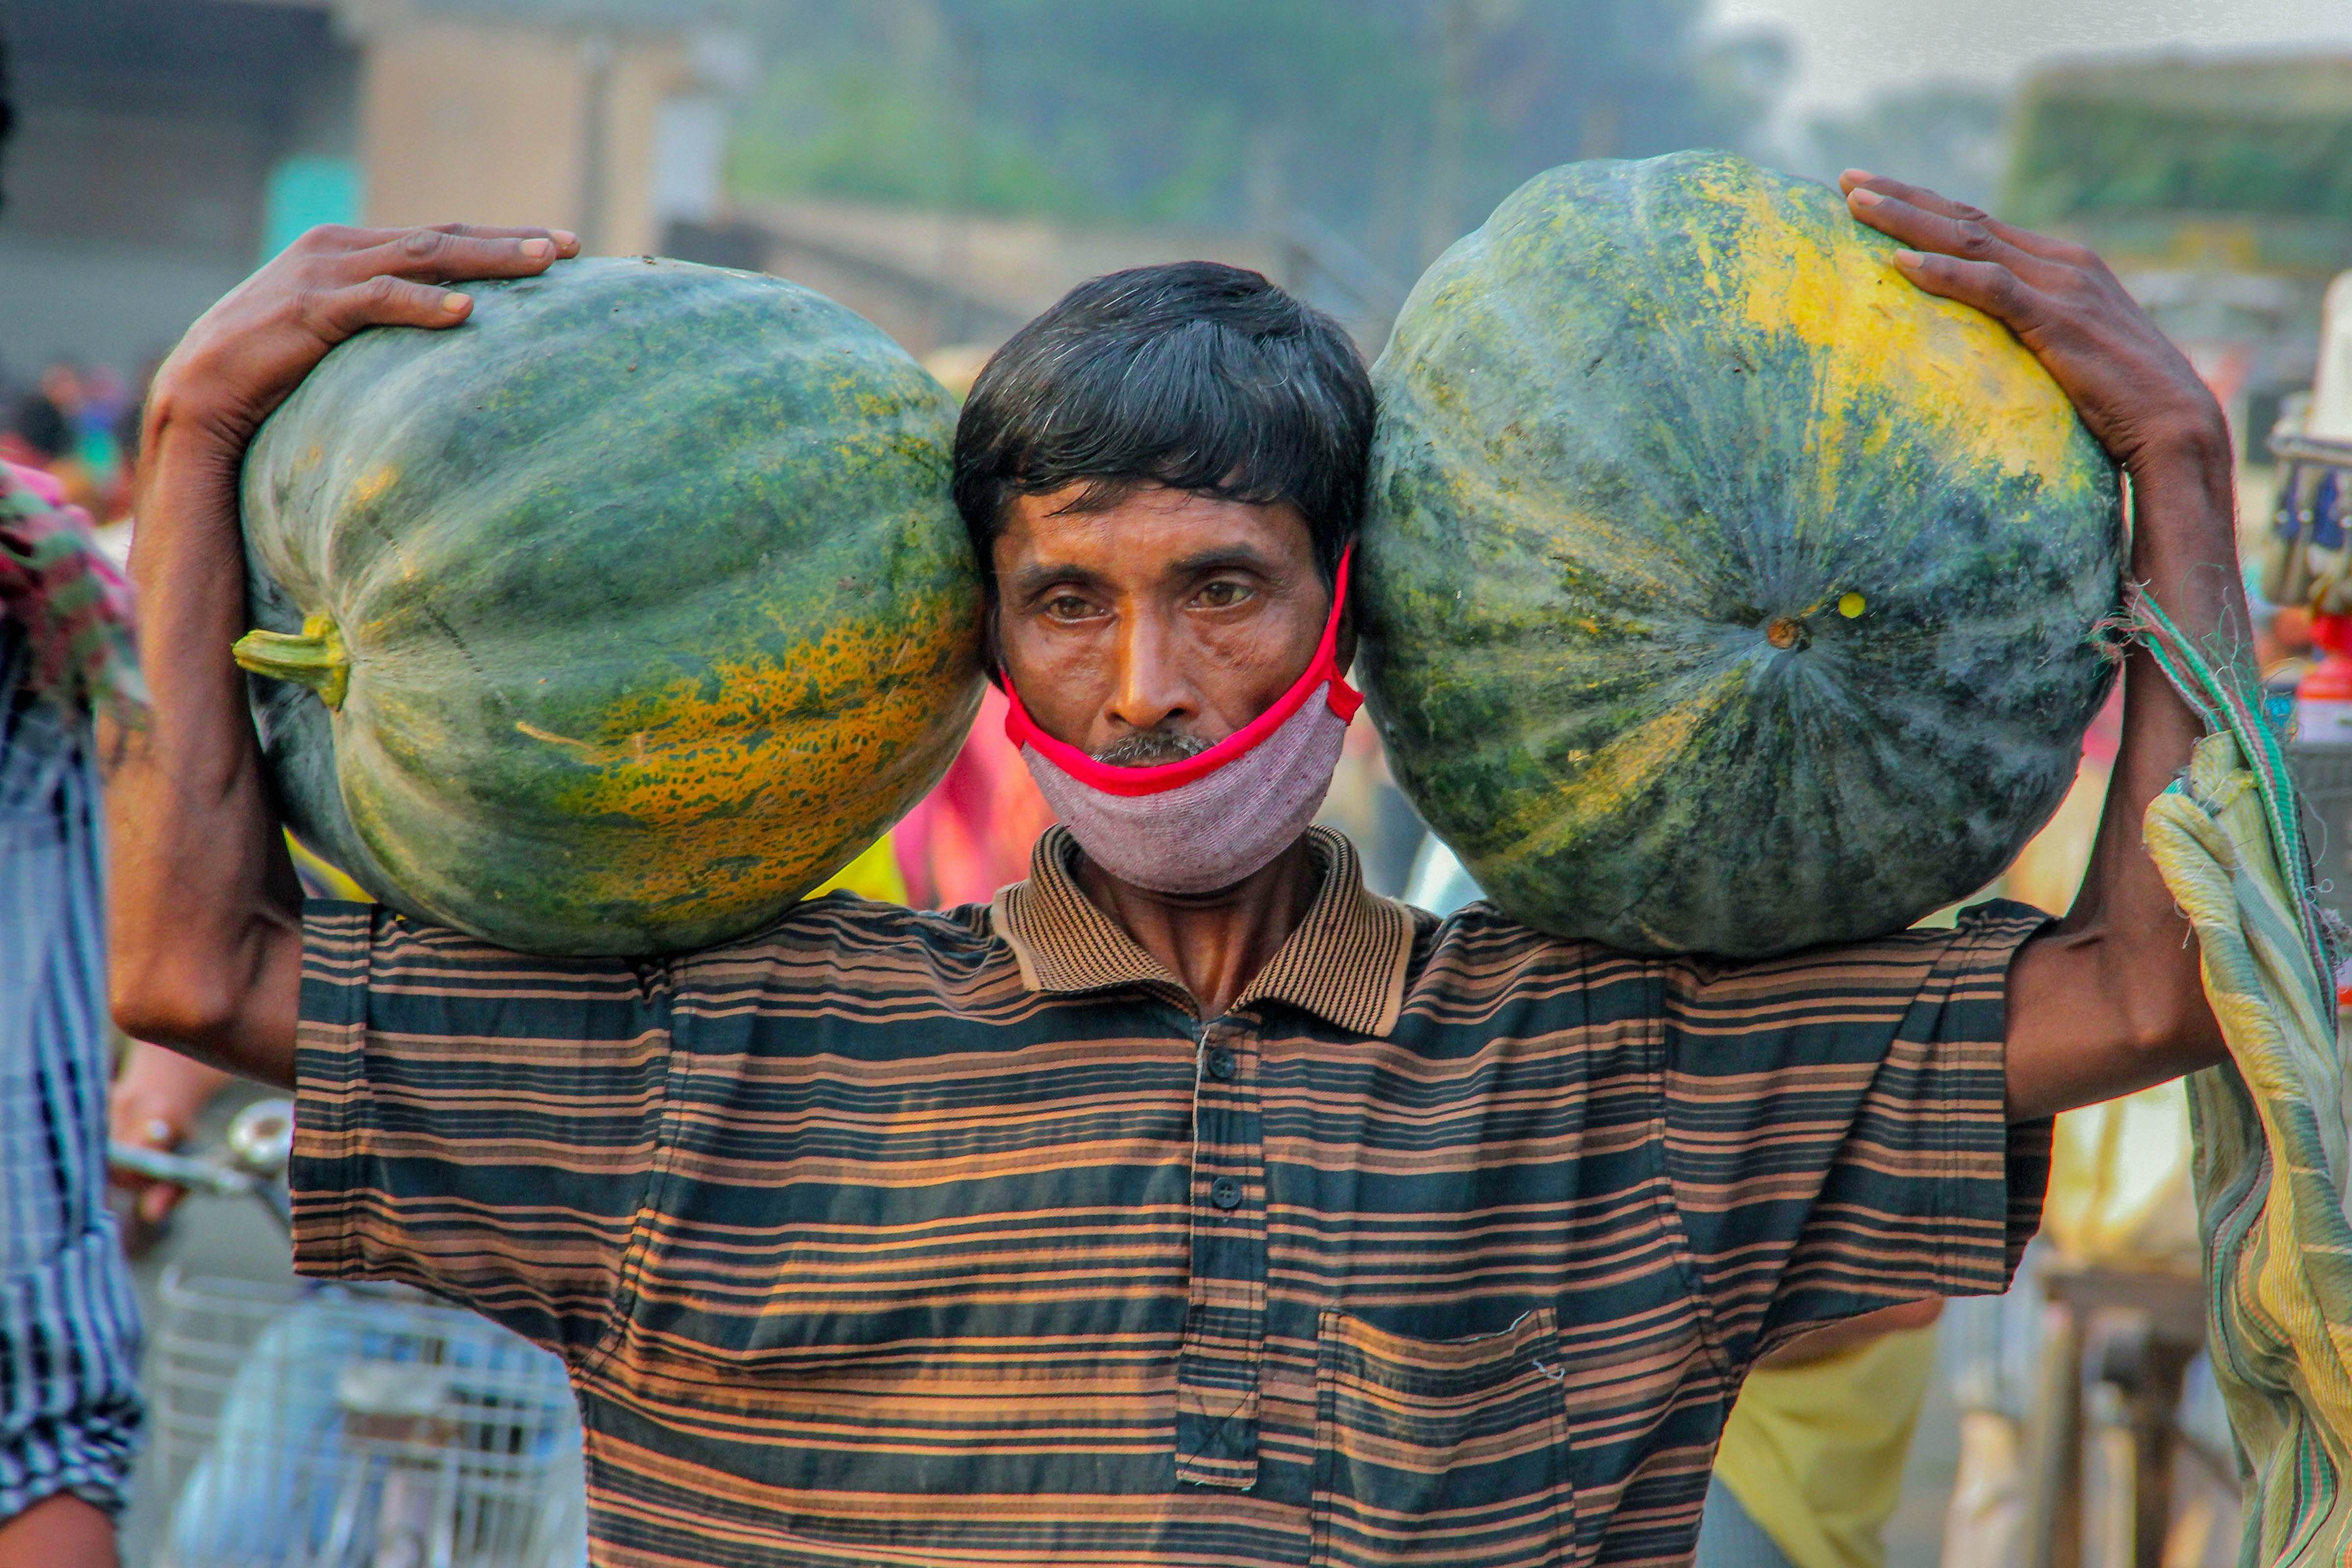 A farmer carries pumpkins on his shoulders at a market during the nationwide lockdown to curb the spread of coronavirus. (Credit: PTI Photo)